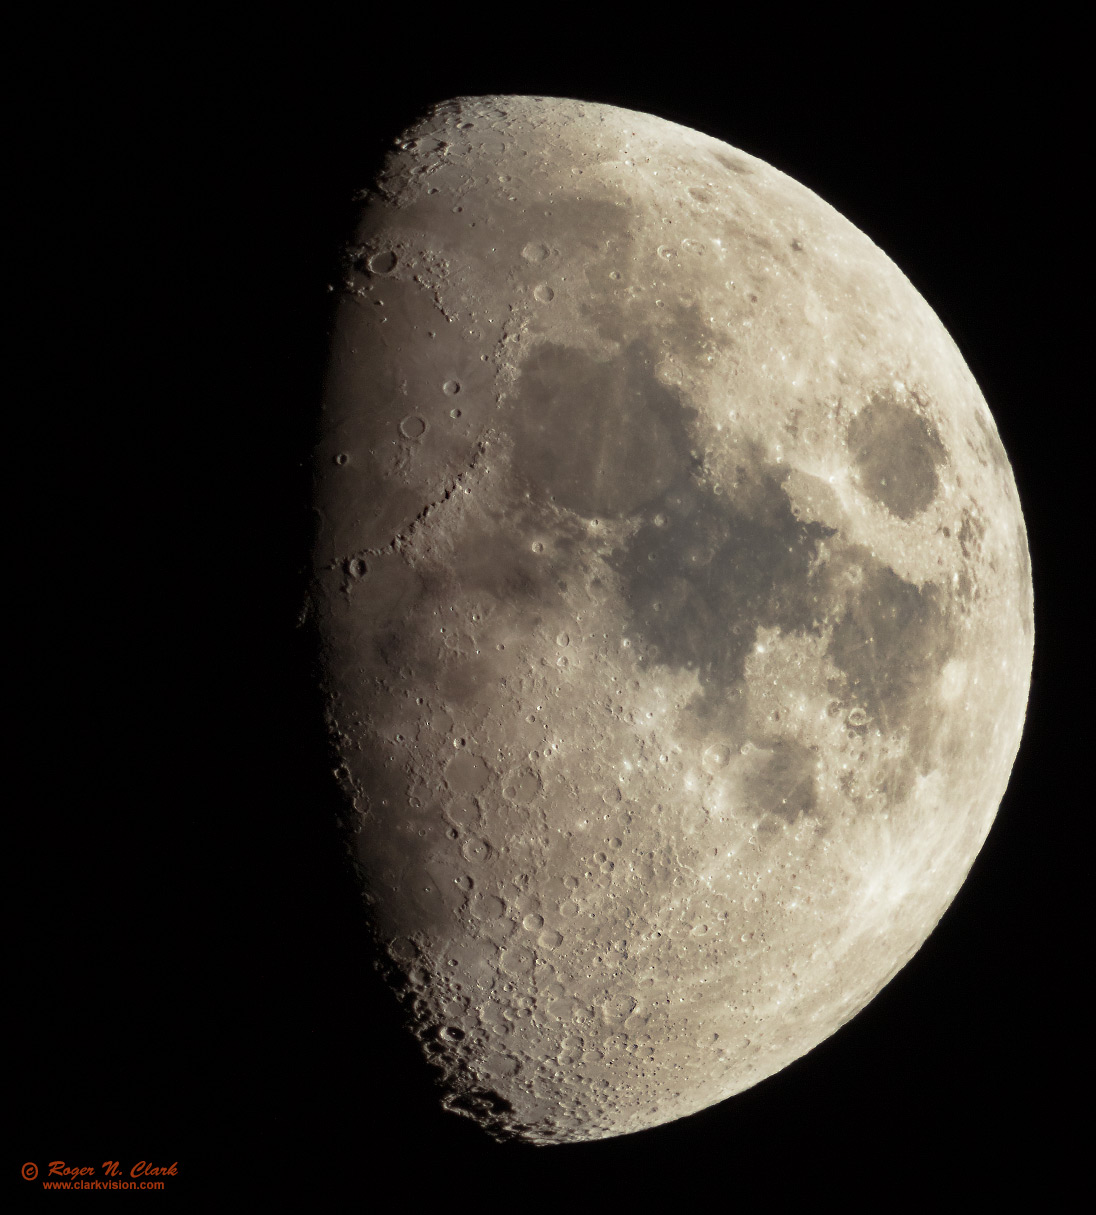 image moon.rnclark.7d2+500mm+2x.c03.28.2015.0J6A1036_h-bin2x2s.jpg is Copyrighted by Roger N. Clark, www.clarkvision.com